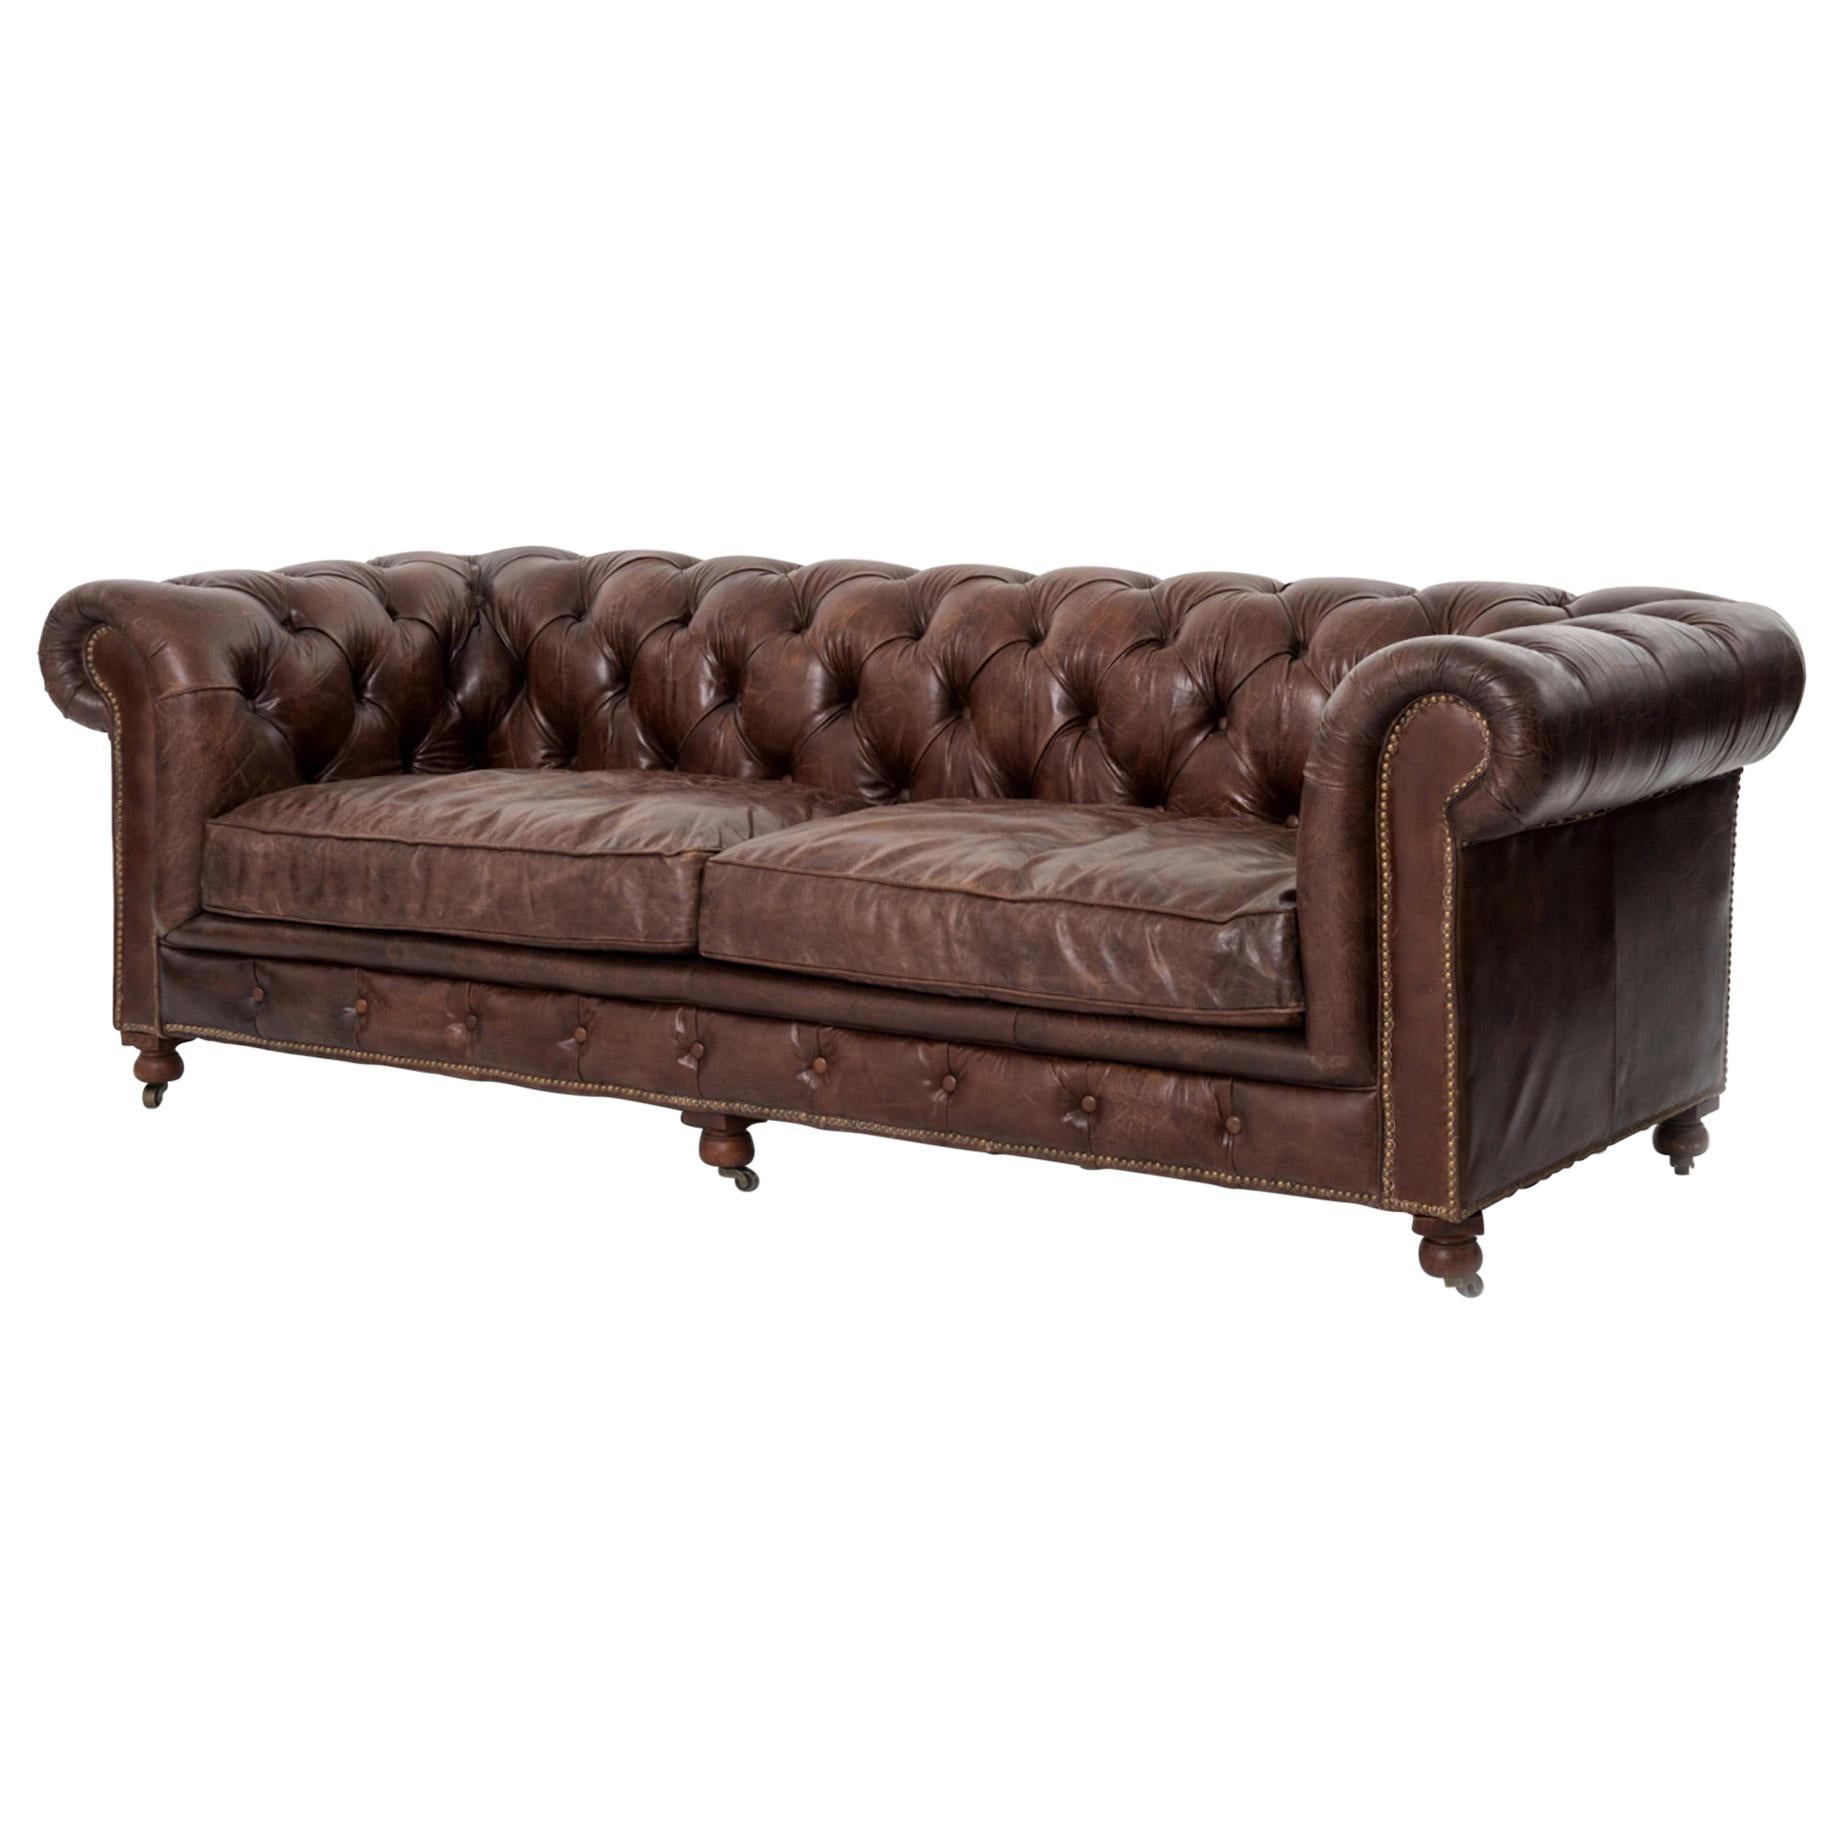 One Pair of Two-Seat Chesterfield Sofa's, Great Scale for Comfort, Great Patina For Sale